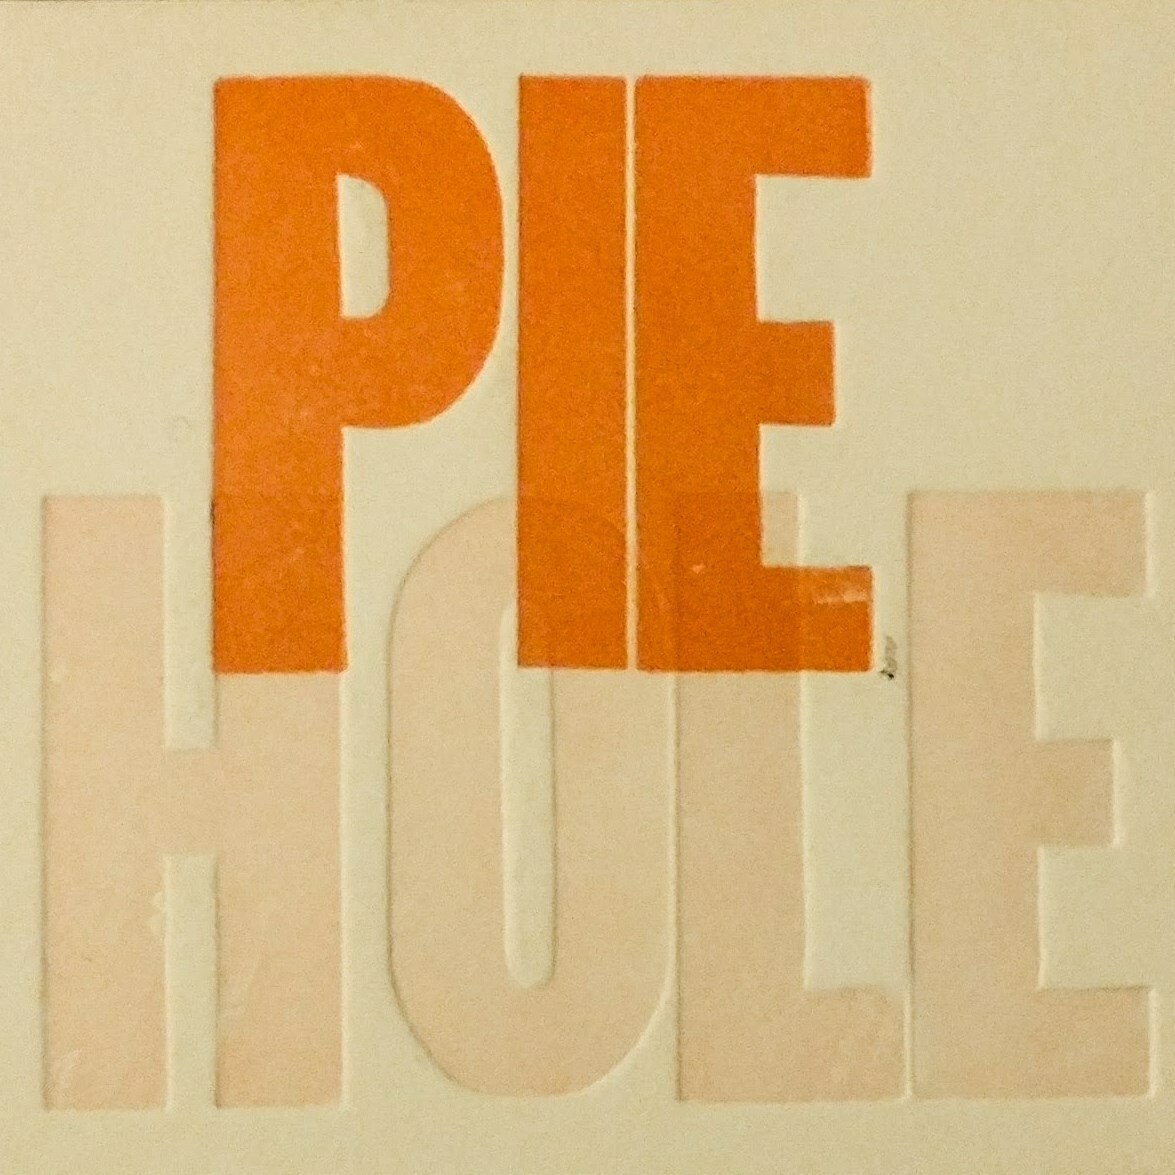 orange and tan text PIE HOLE over tan background.